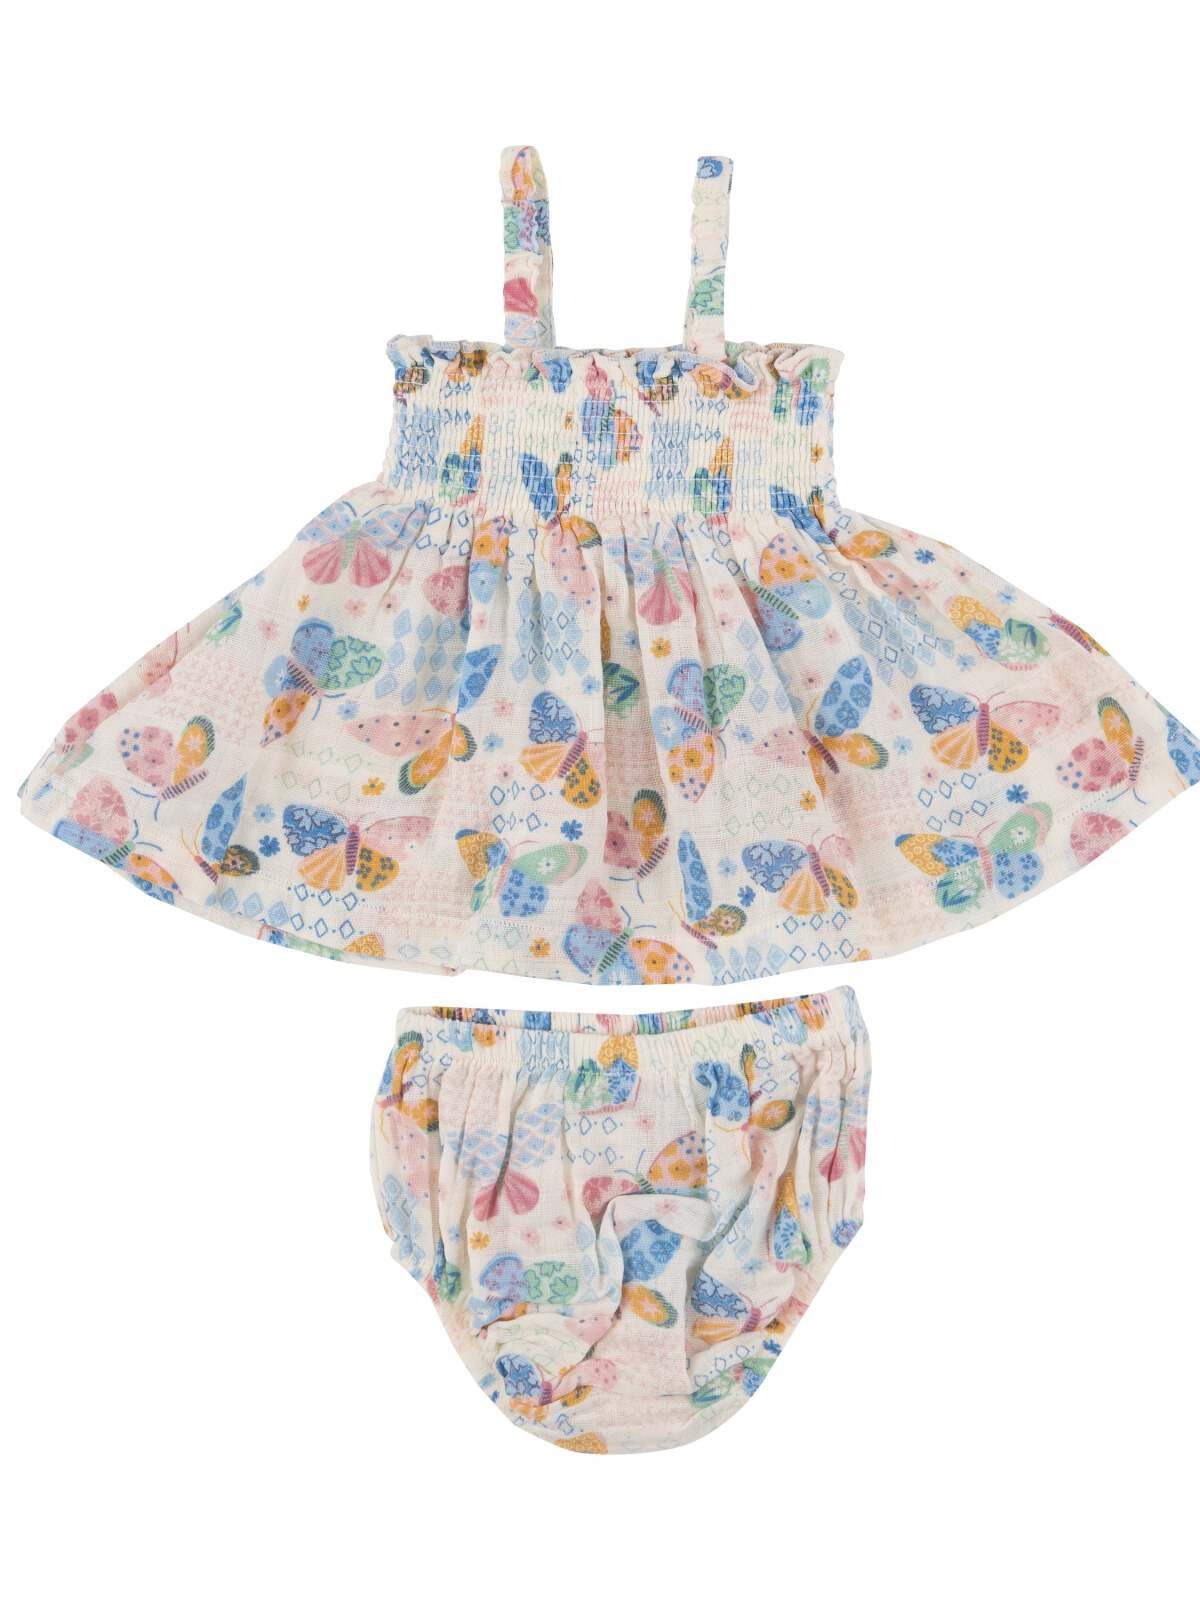 Smocked Top & Bloomer, Butterfly Patch | SpearmintLOVE